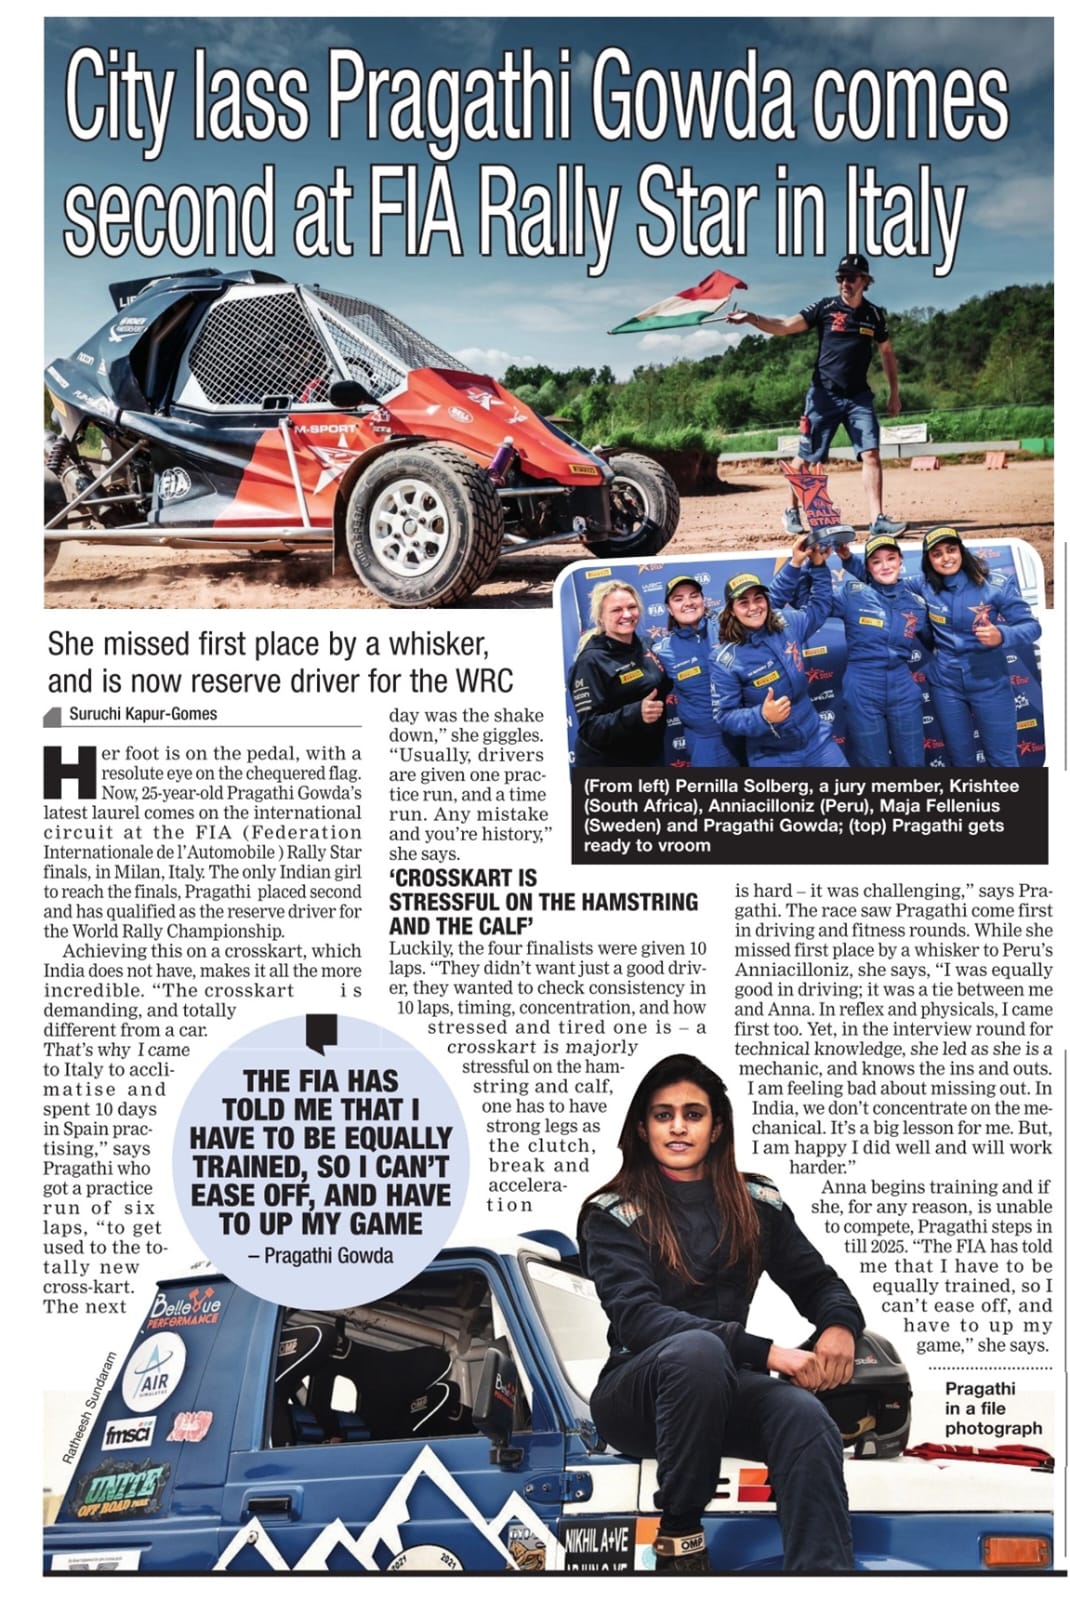 City Lass Pragathi Gowda Comes second at FIA Rally Star in Italy.